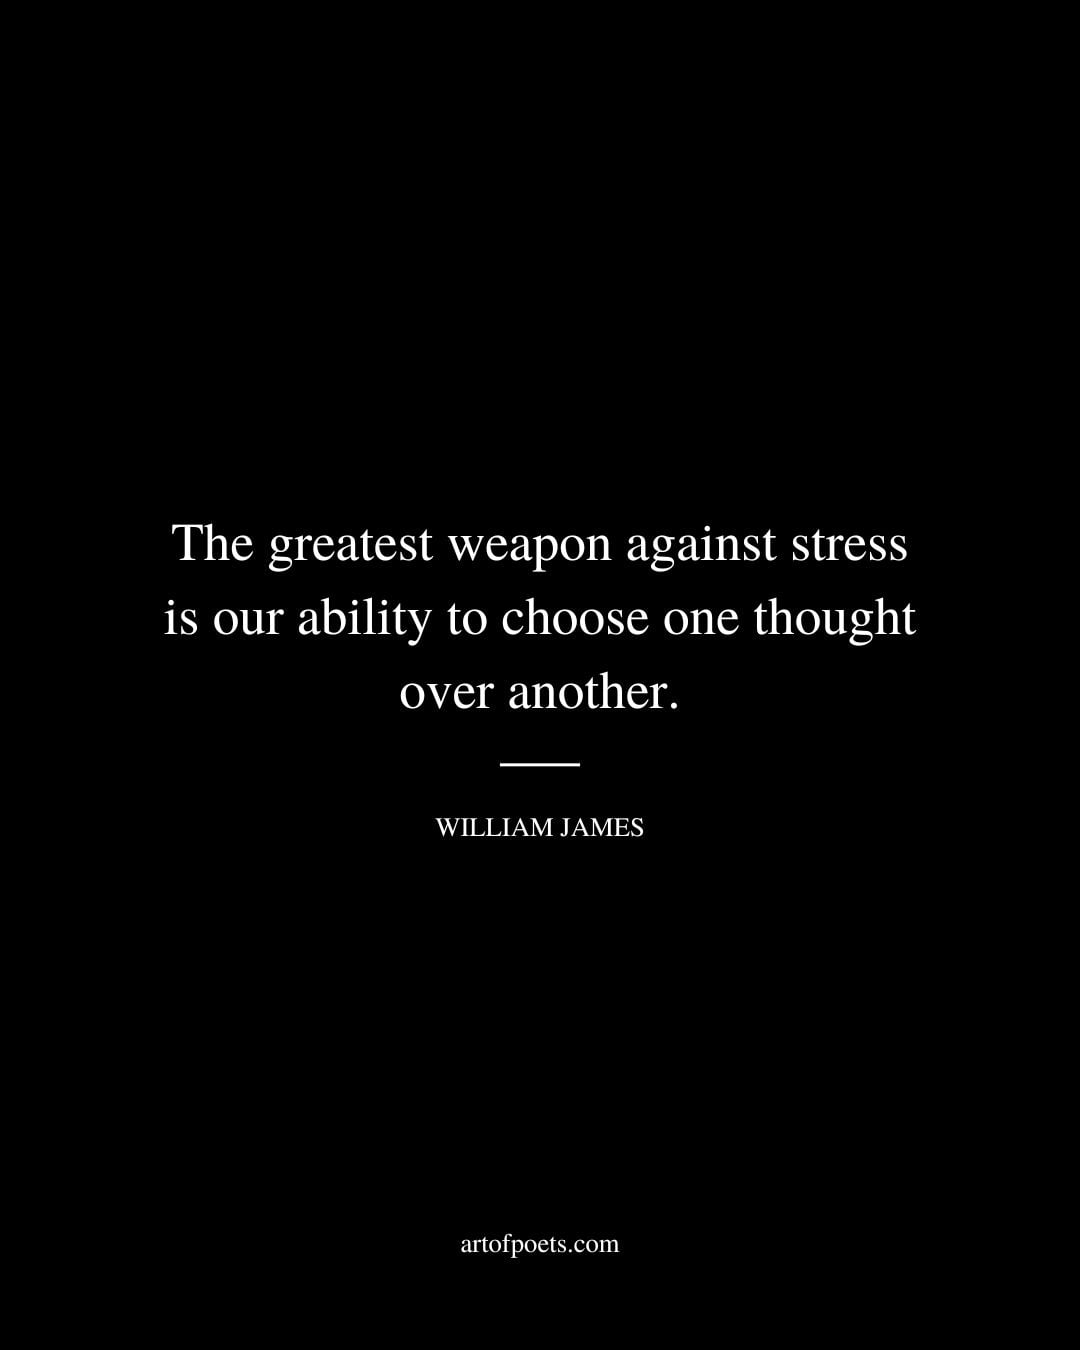 The greatest weapon against stress is our ability to choose one thought over another. ―William James